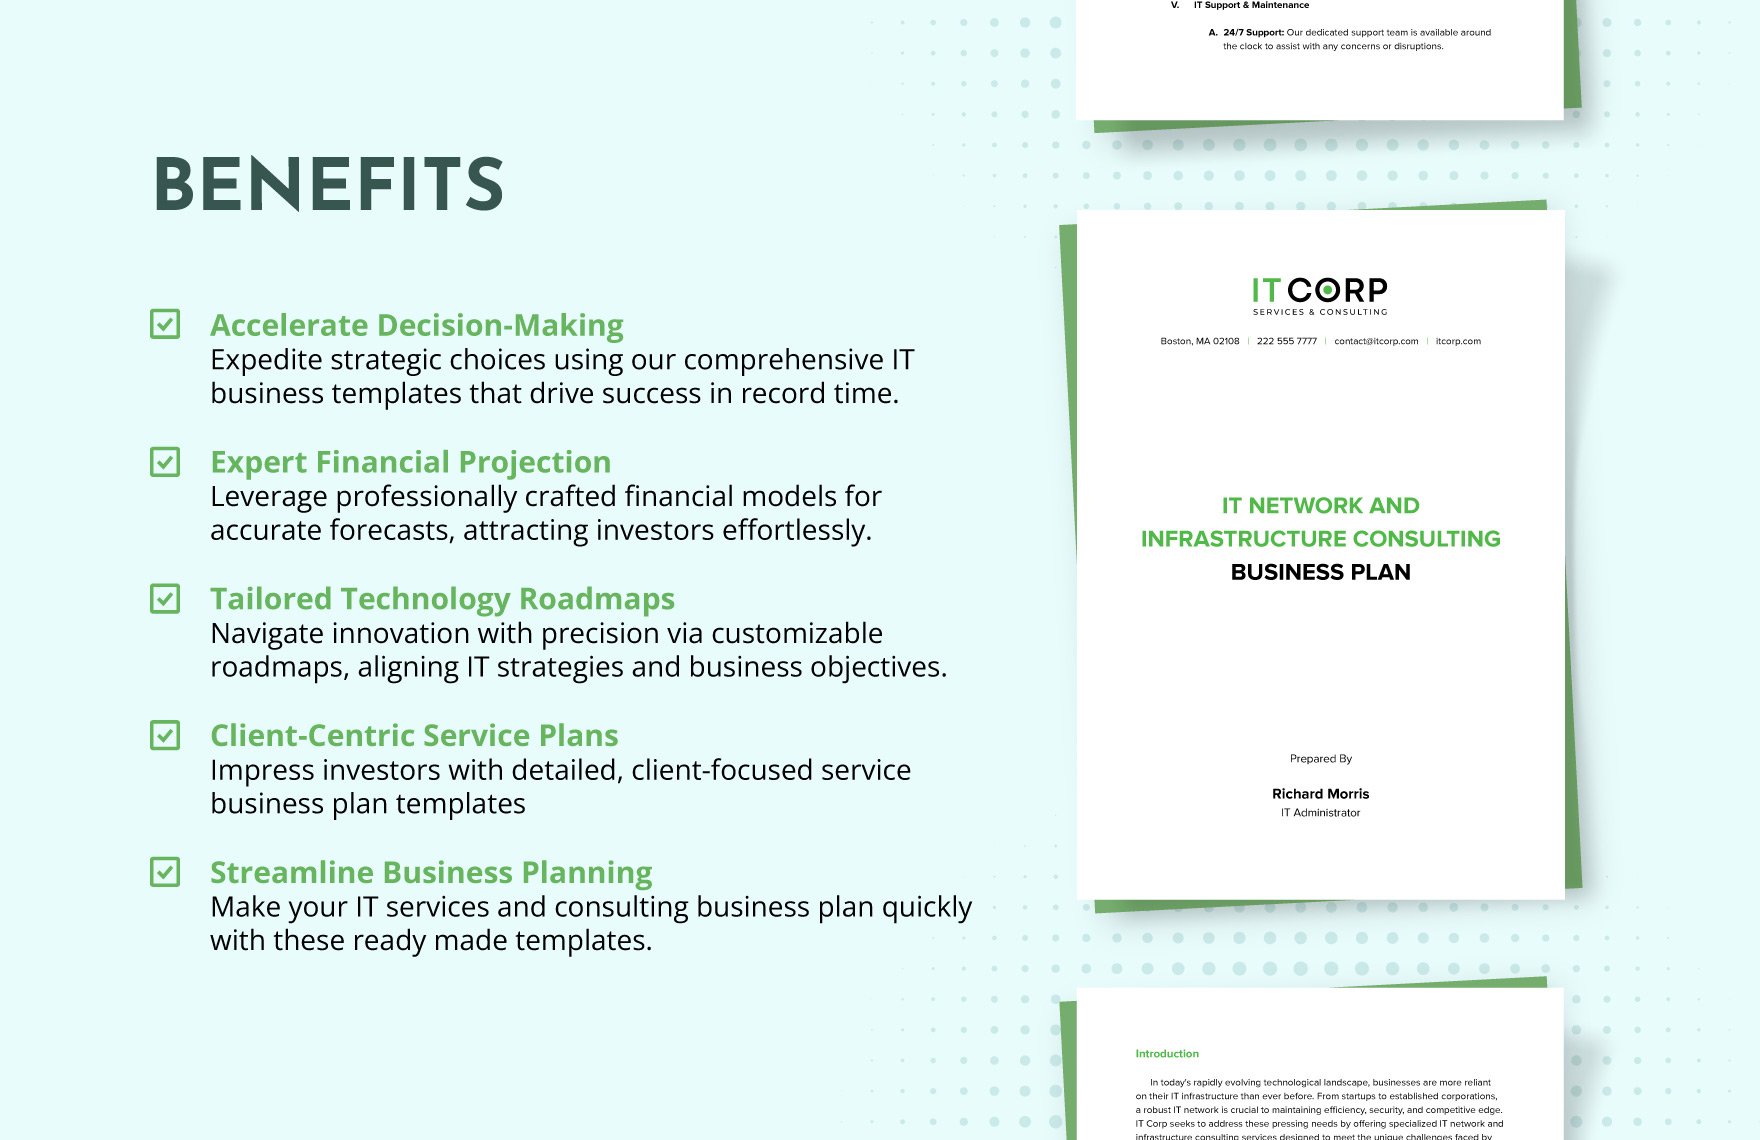 IT Network & Infrastructure Consulting Business Plan Template